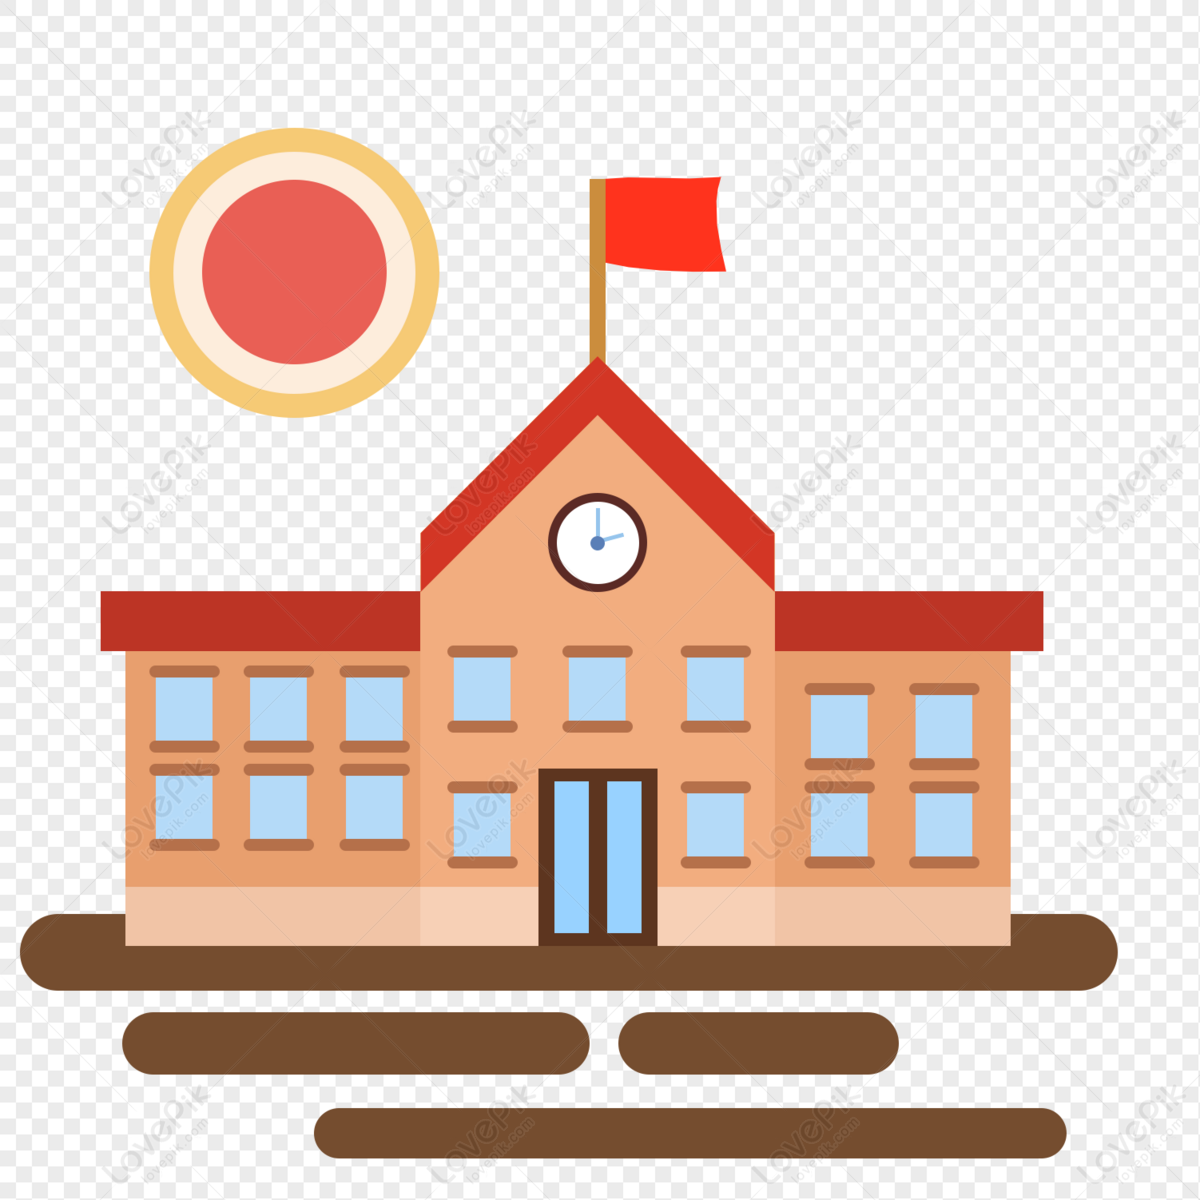 Cartoon Primary School School Building Free PNG And Clipart Image For Free  Download - Lovepik | 401563019